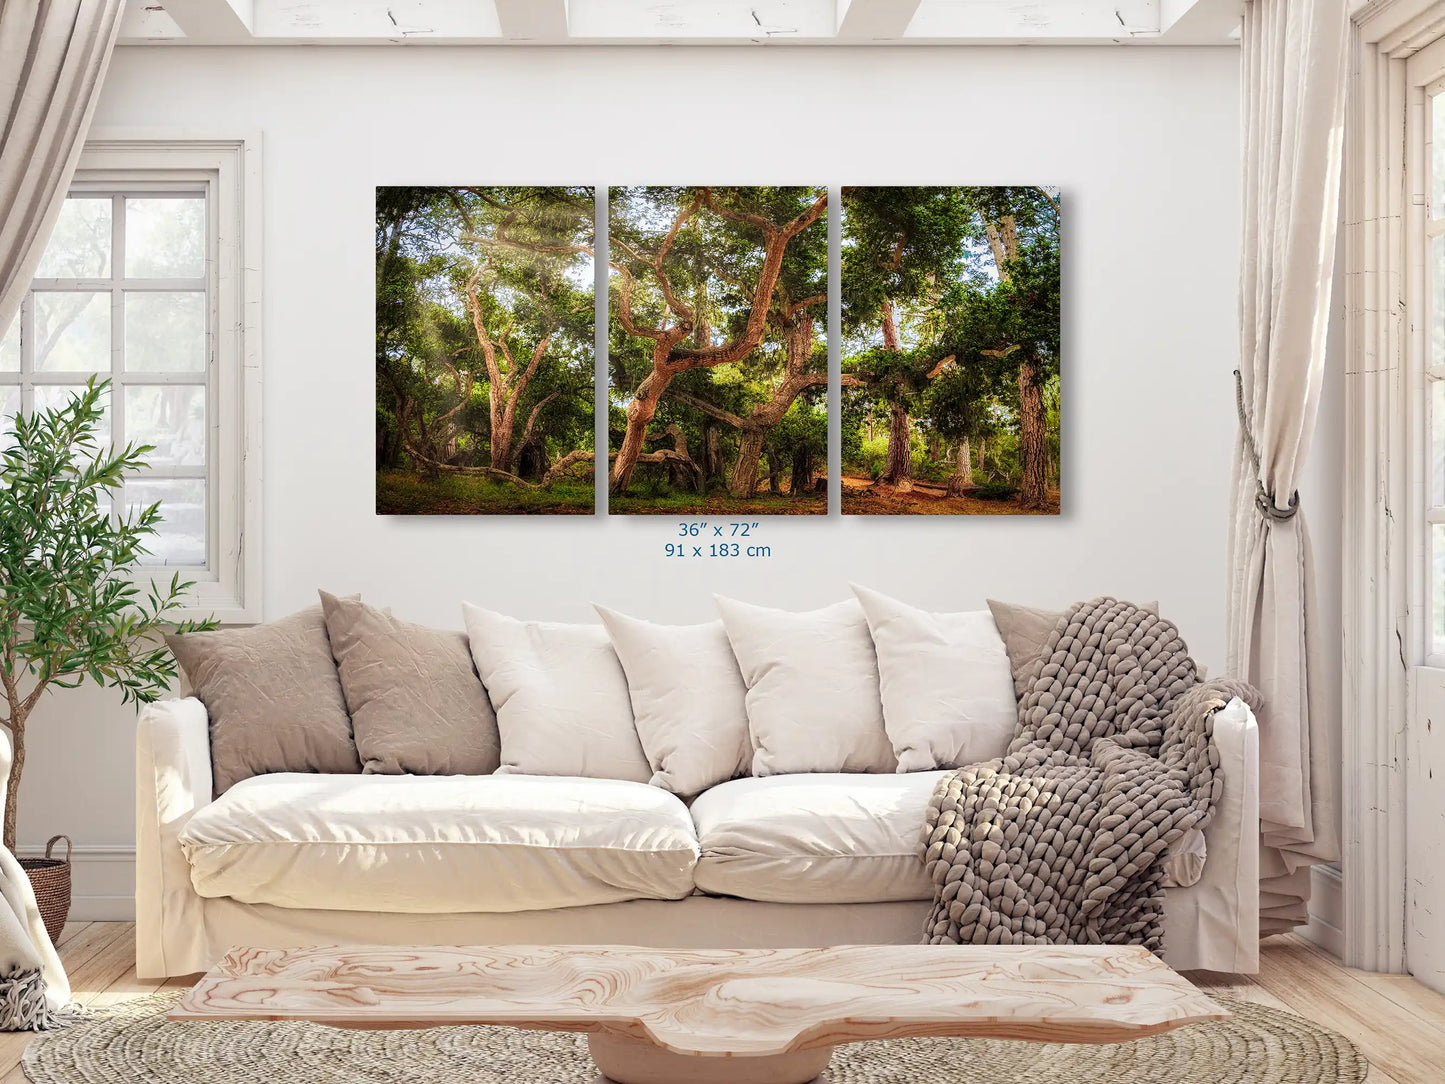 Bright living room decorated with a three-panel 36x72" Coast Live Oak Tree art display above the couch, offering a view into a lush forest scene.